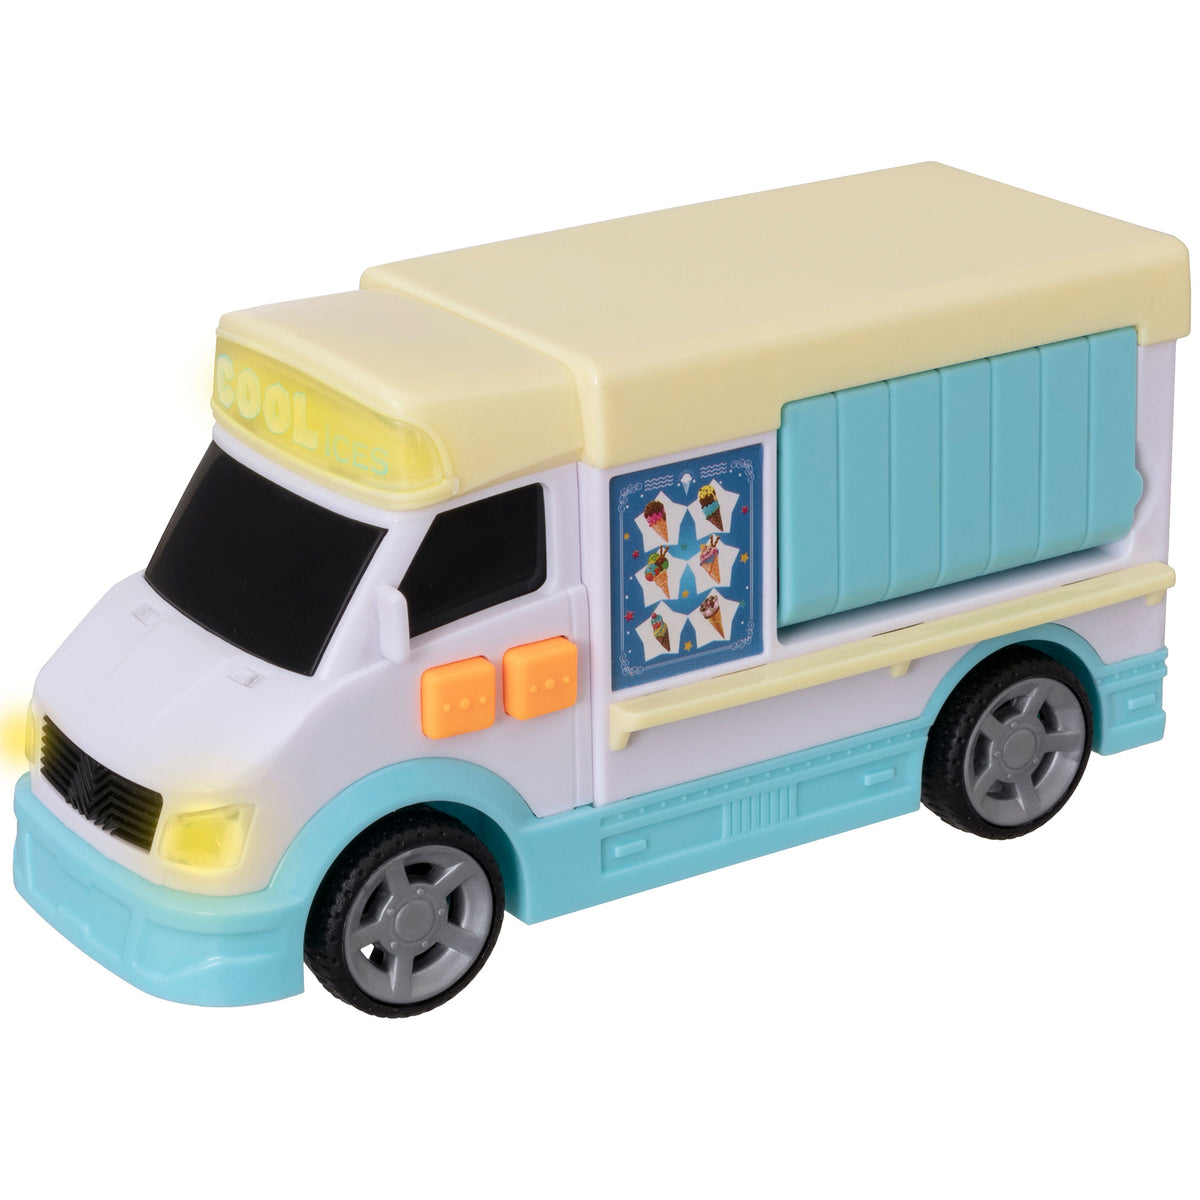 Teamsterz Mighty Machines Small Ice Cream Van Toy